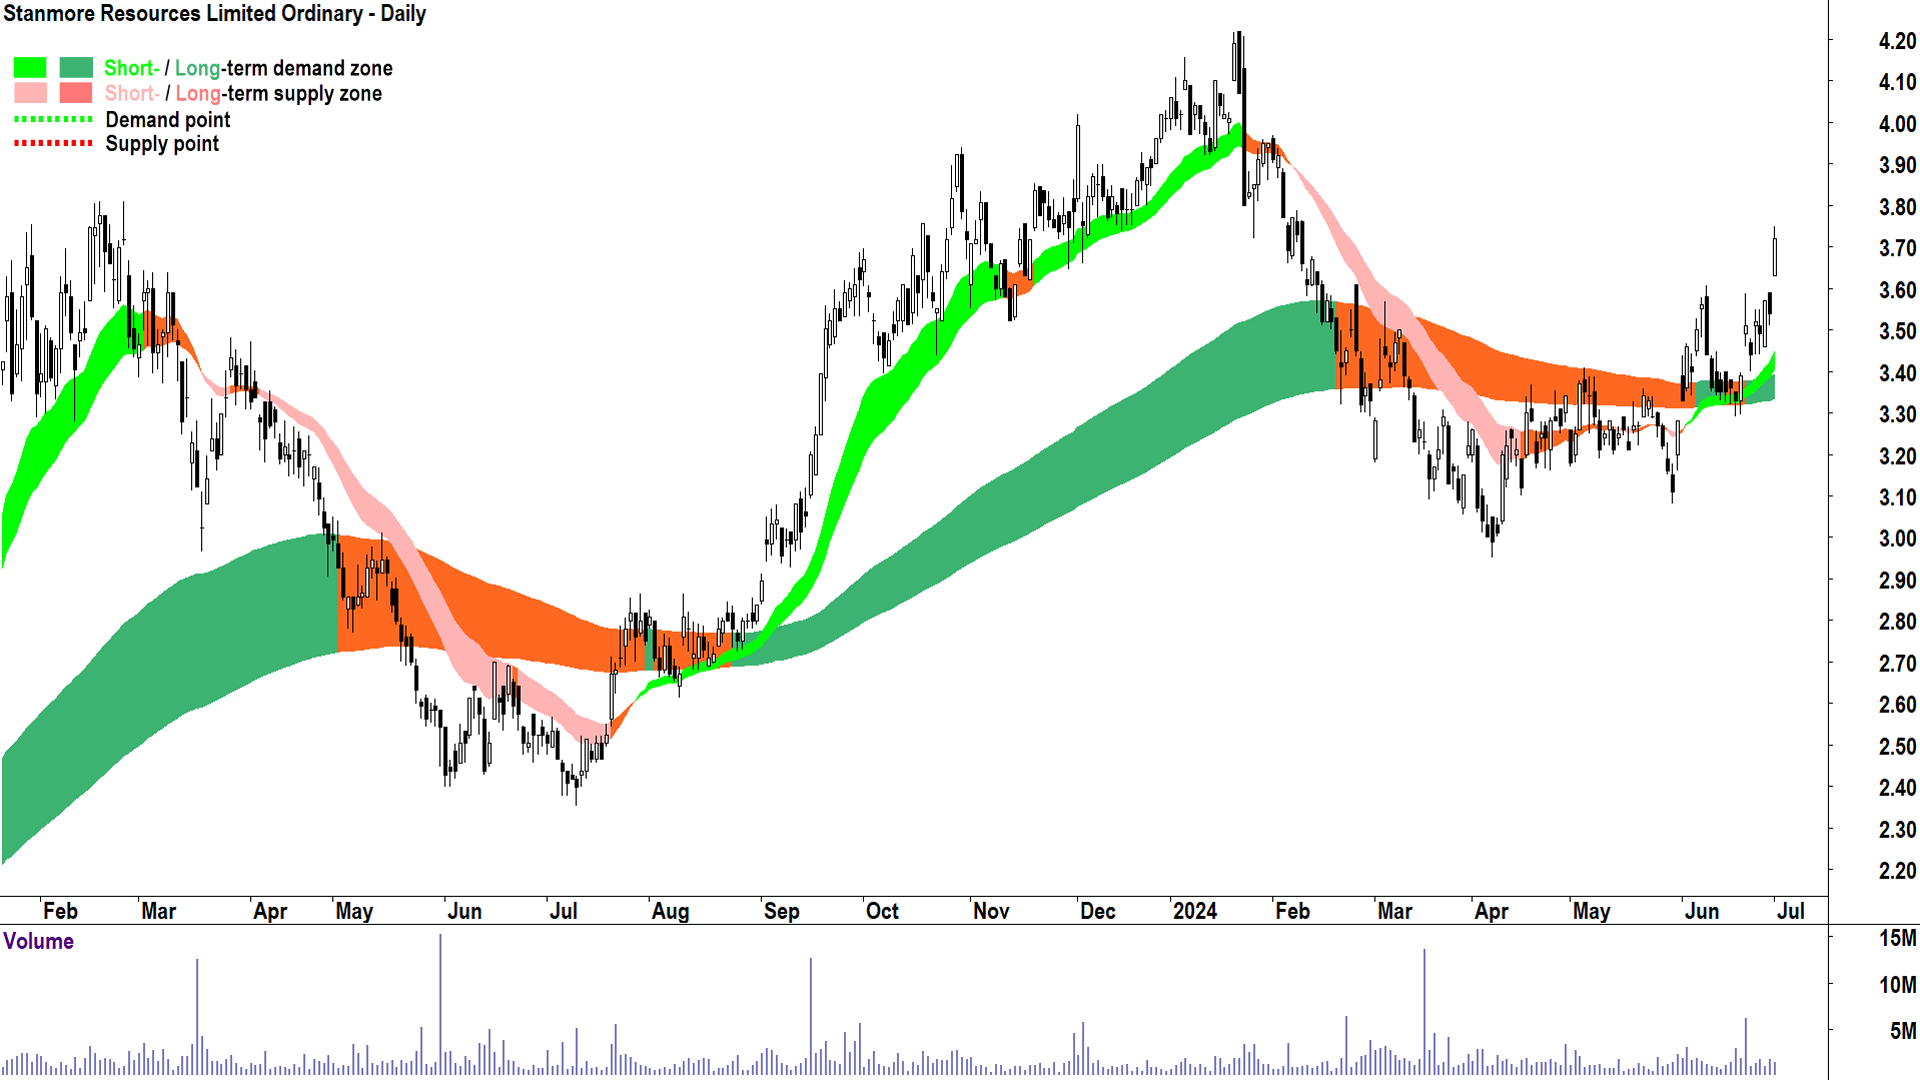 Stanmore Resources (ASX-SMR) chart 1 July 2024